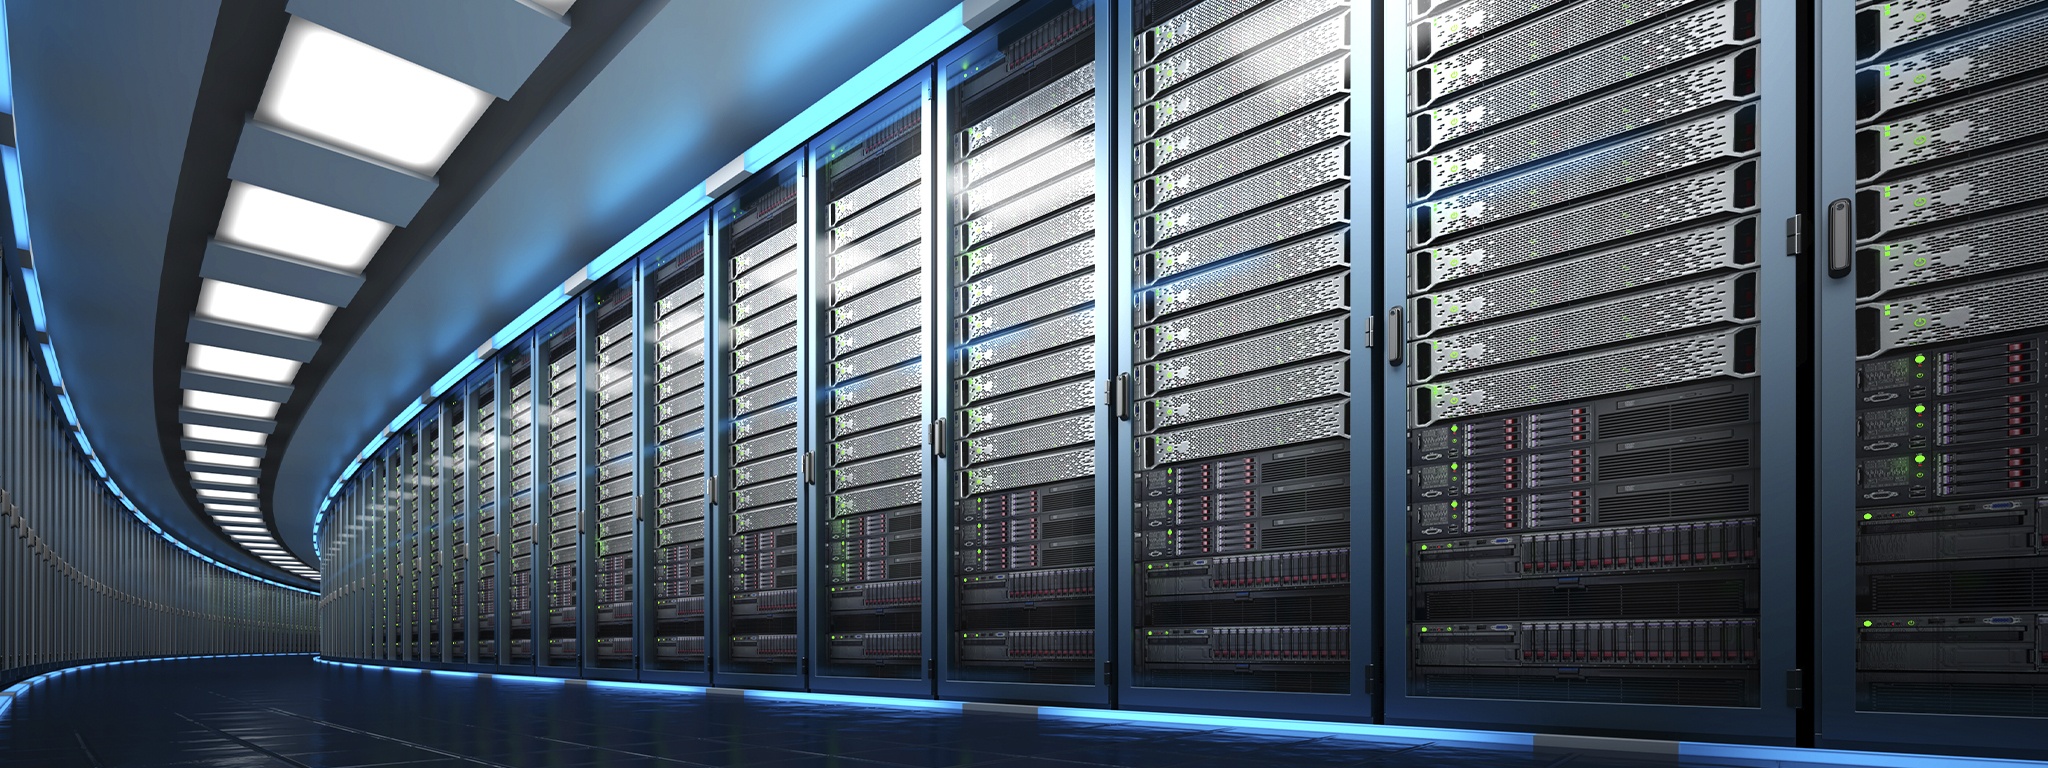 3D rendering of a data center showing a big server room with a long line of server rack units